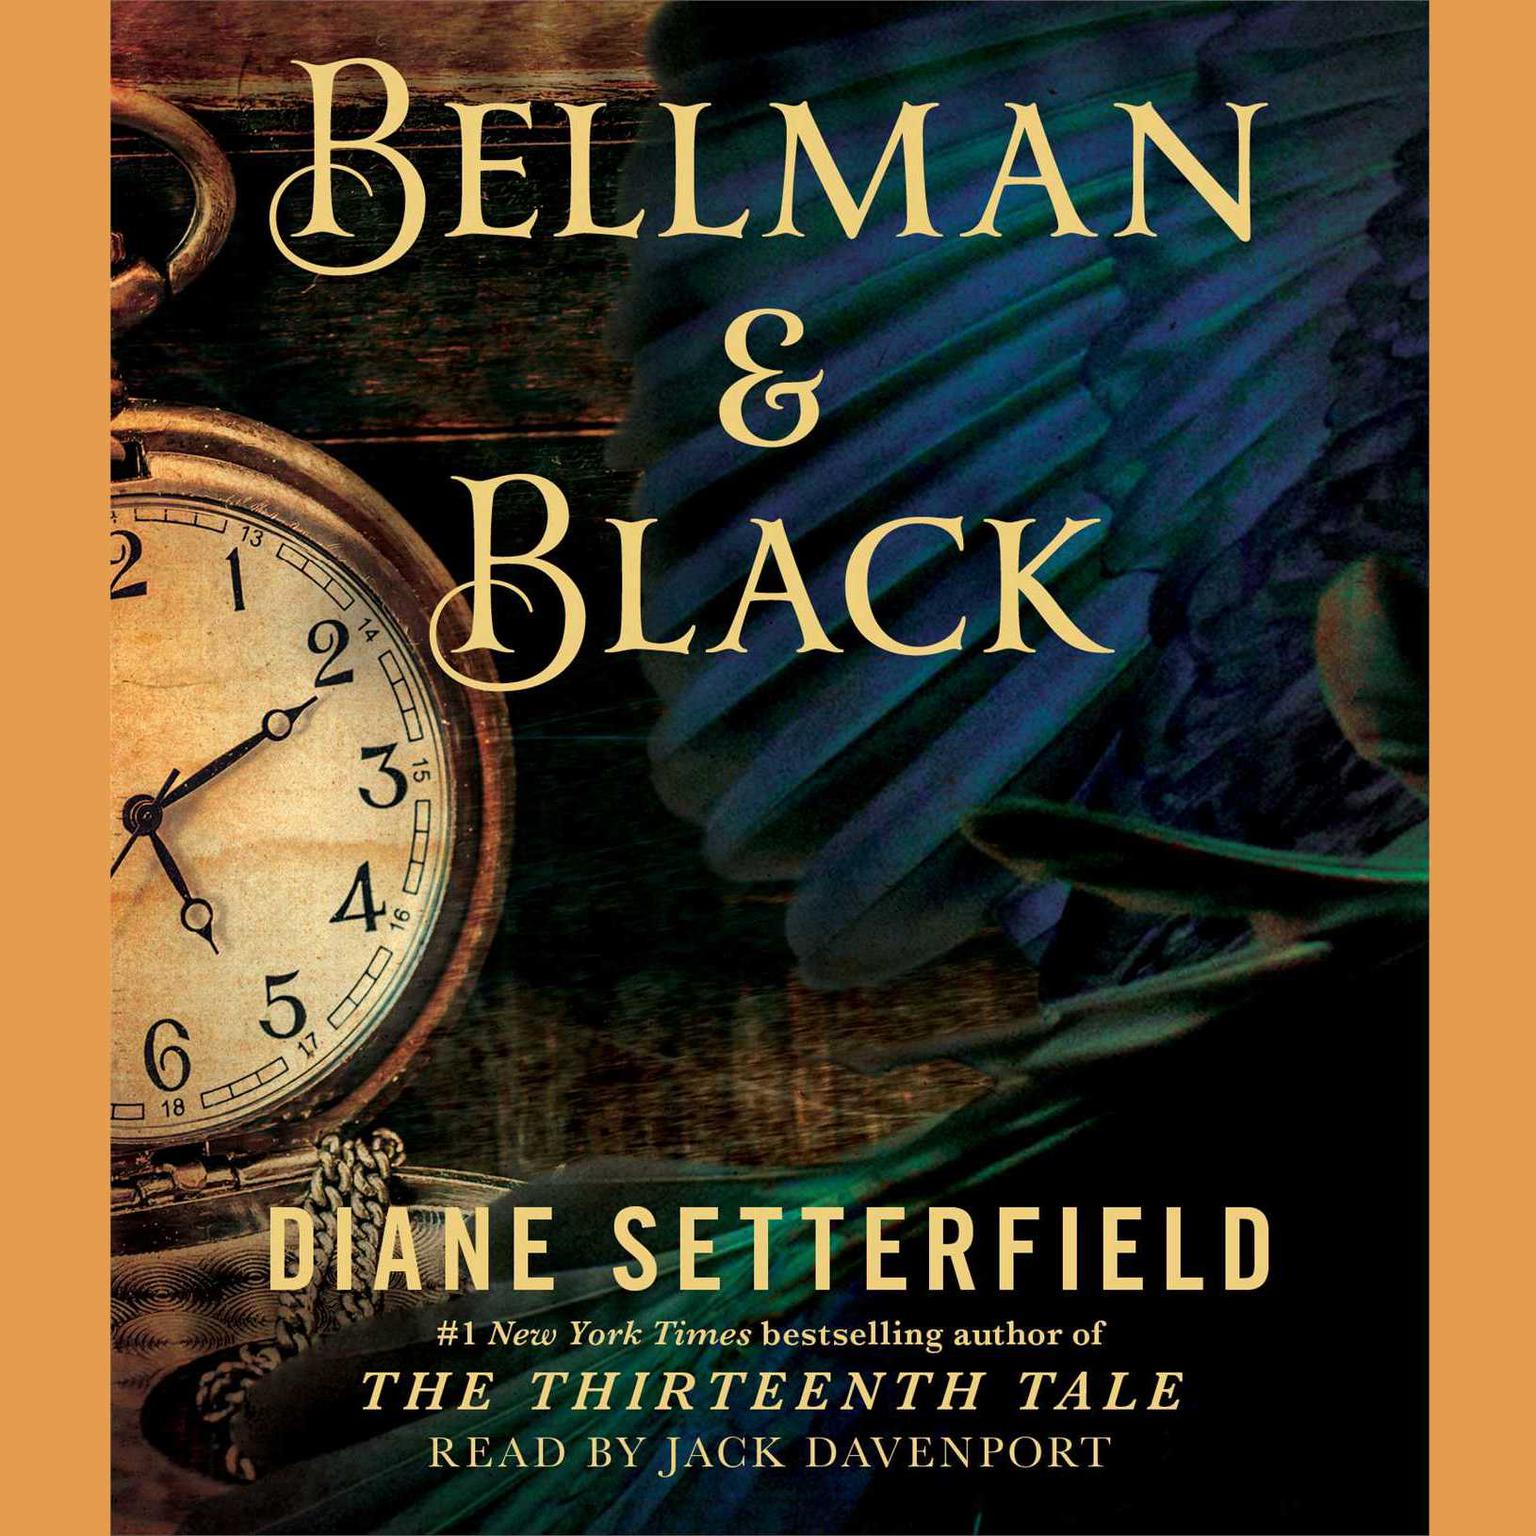 Bellman & Black: A Ghost Story Audiobook, by Diane Setterfield